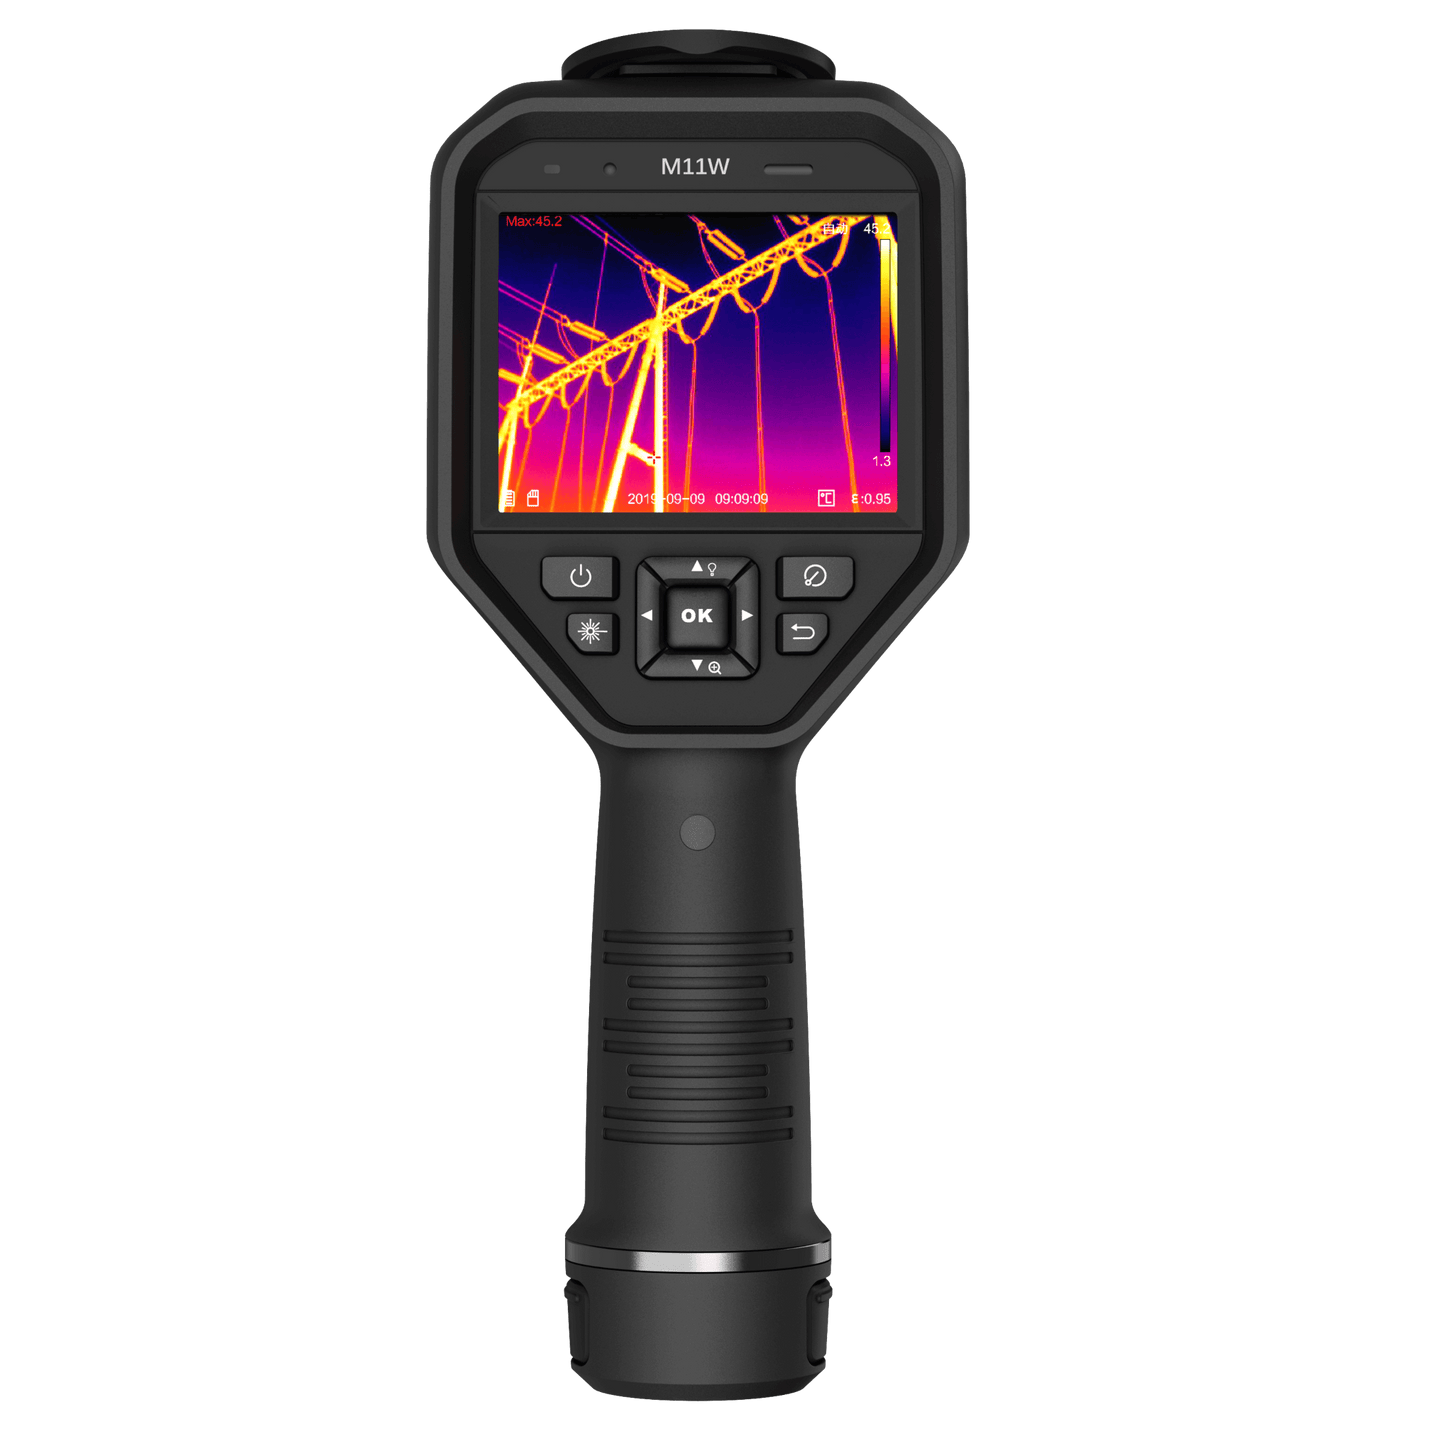 HikMicro M11W Handheld Thermography Camera alternative screen view on a transparent background